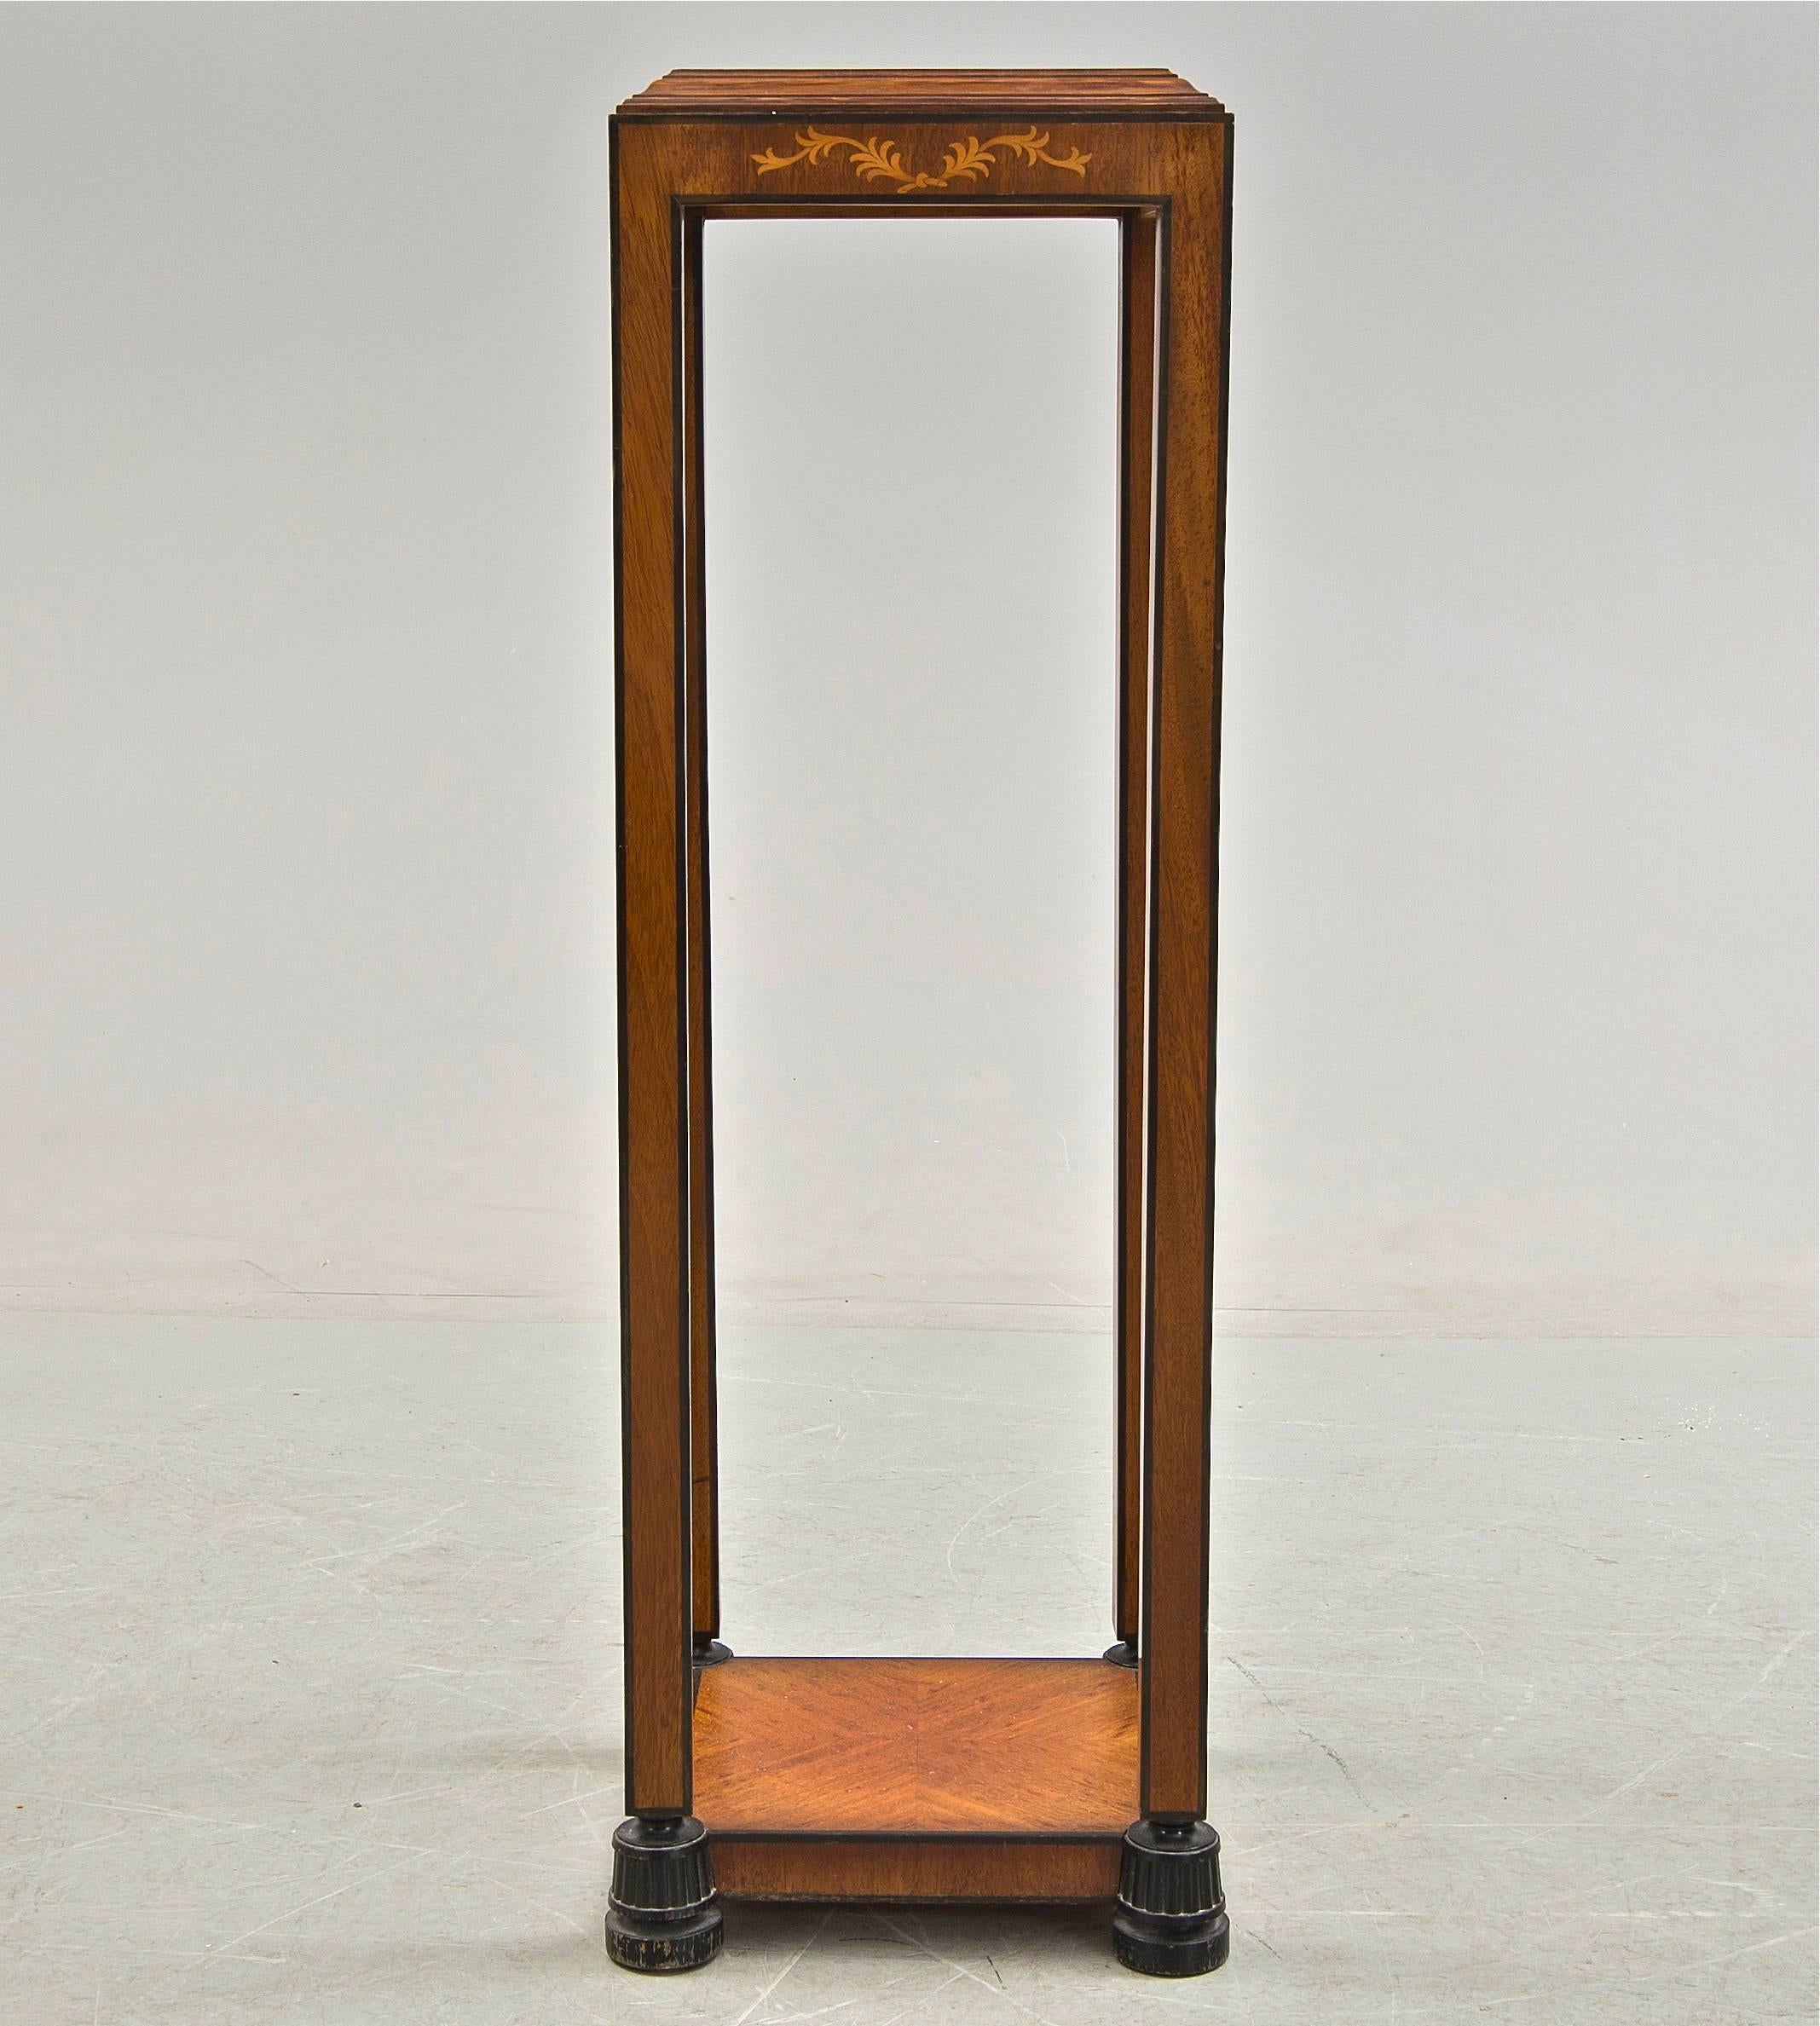 Swedish grace style pedestal. Mahogany with inlay. Sweden, circa 1920-1930.
Measures: 12.2